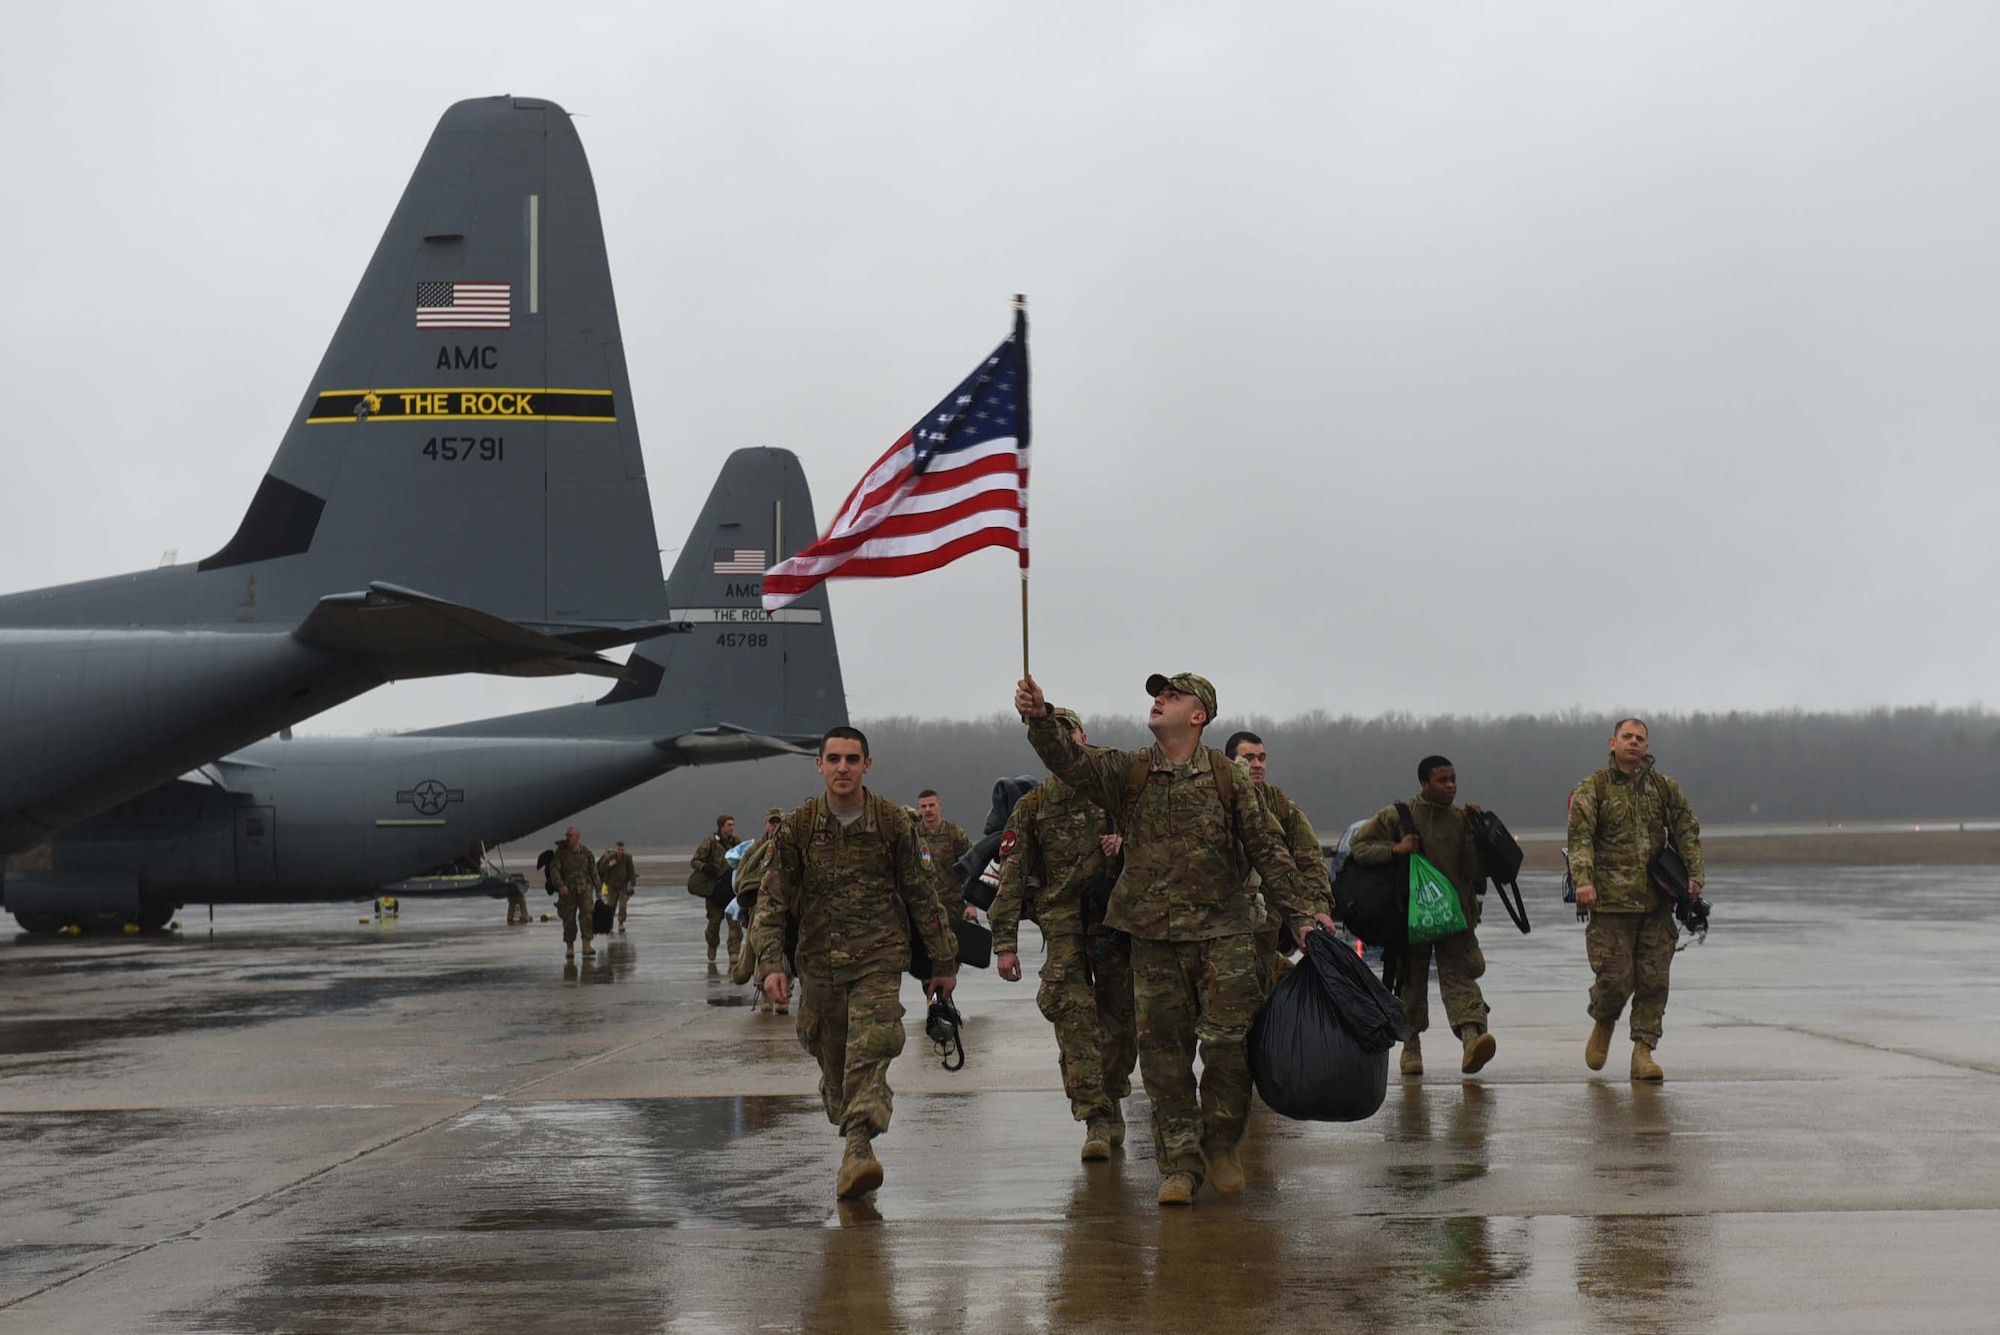 U.S. Air Force Airmen arrive home after a six-month deployment to Southwest Asia Jan. 19, 2017, at Little Rock Air Force Base, Ark. Team Little Rock Airmen specialize in providing rapid, global mobility to support humanitarian and wartime operations. (U.S. Air Force photo by Airman 1st Class Kevin Sommer Giron)